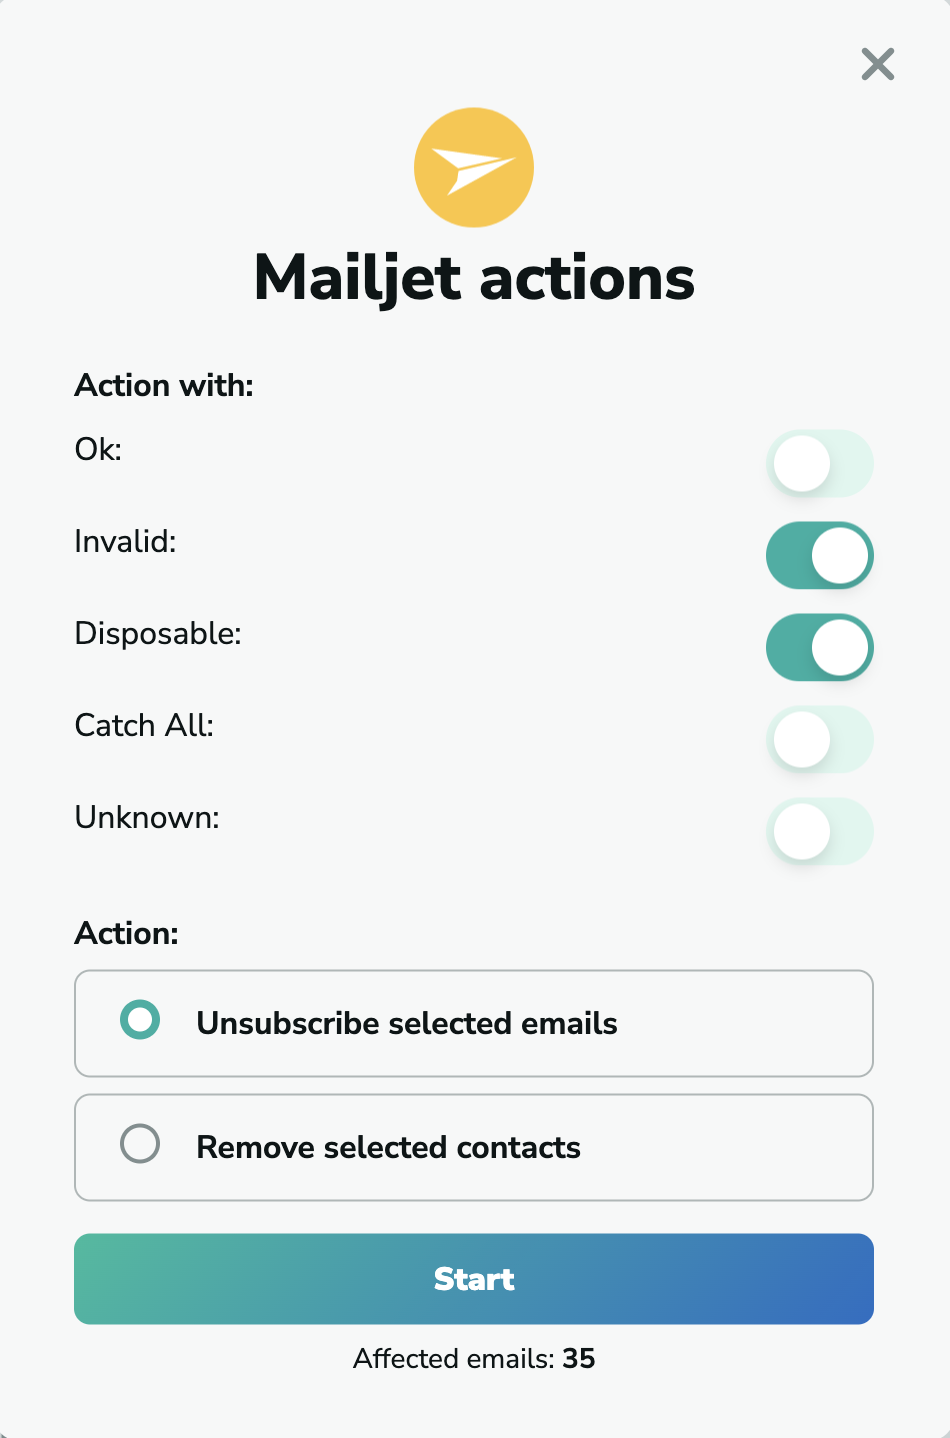 Mailjet unsubscribe emails in MillionVerifier